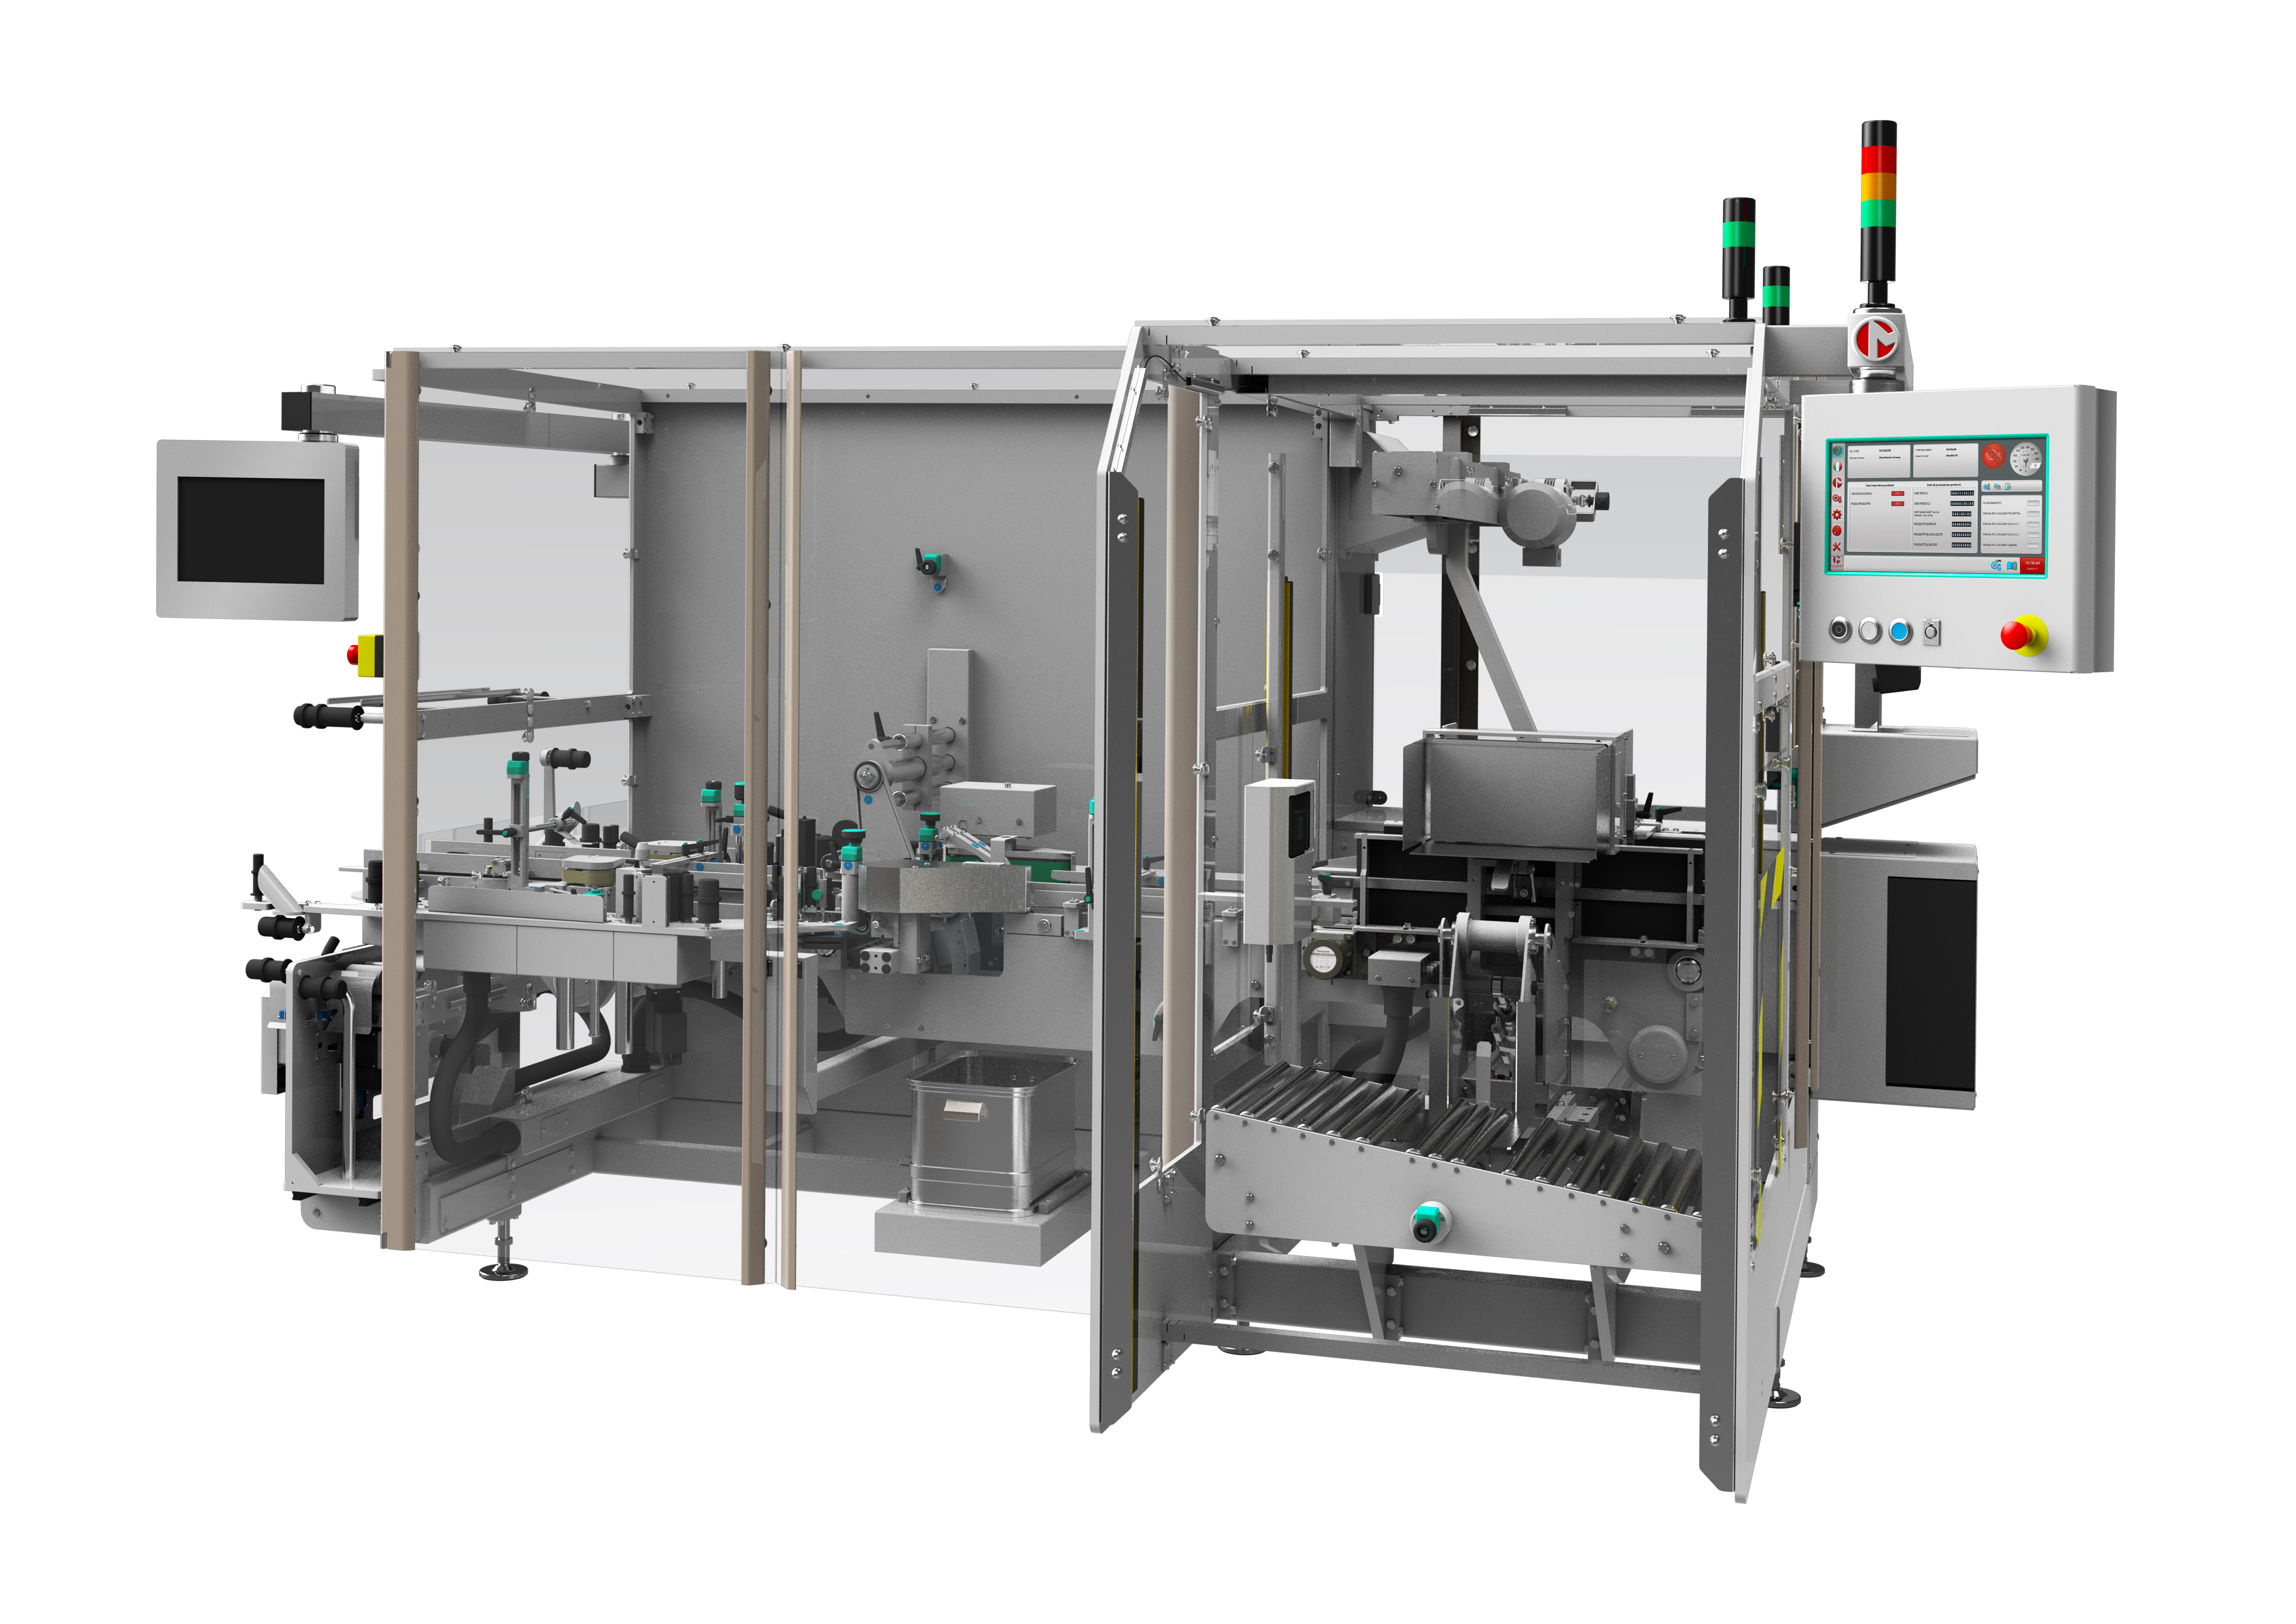 Continuous motion monoblock machine for serialization, aggregation and Vignette or Tamper Evident applications TRACKPACK